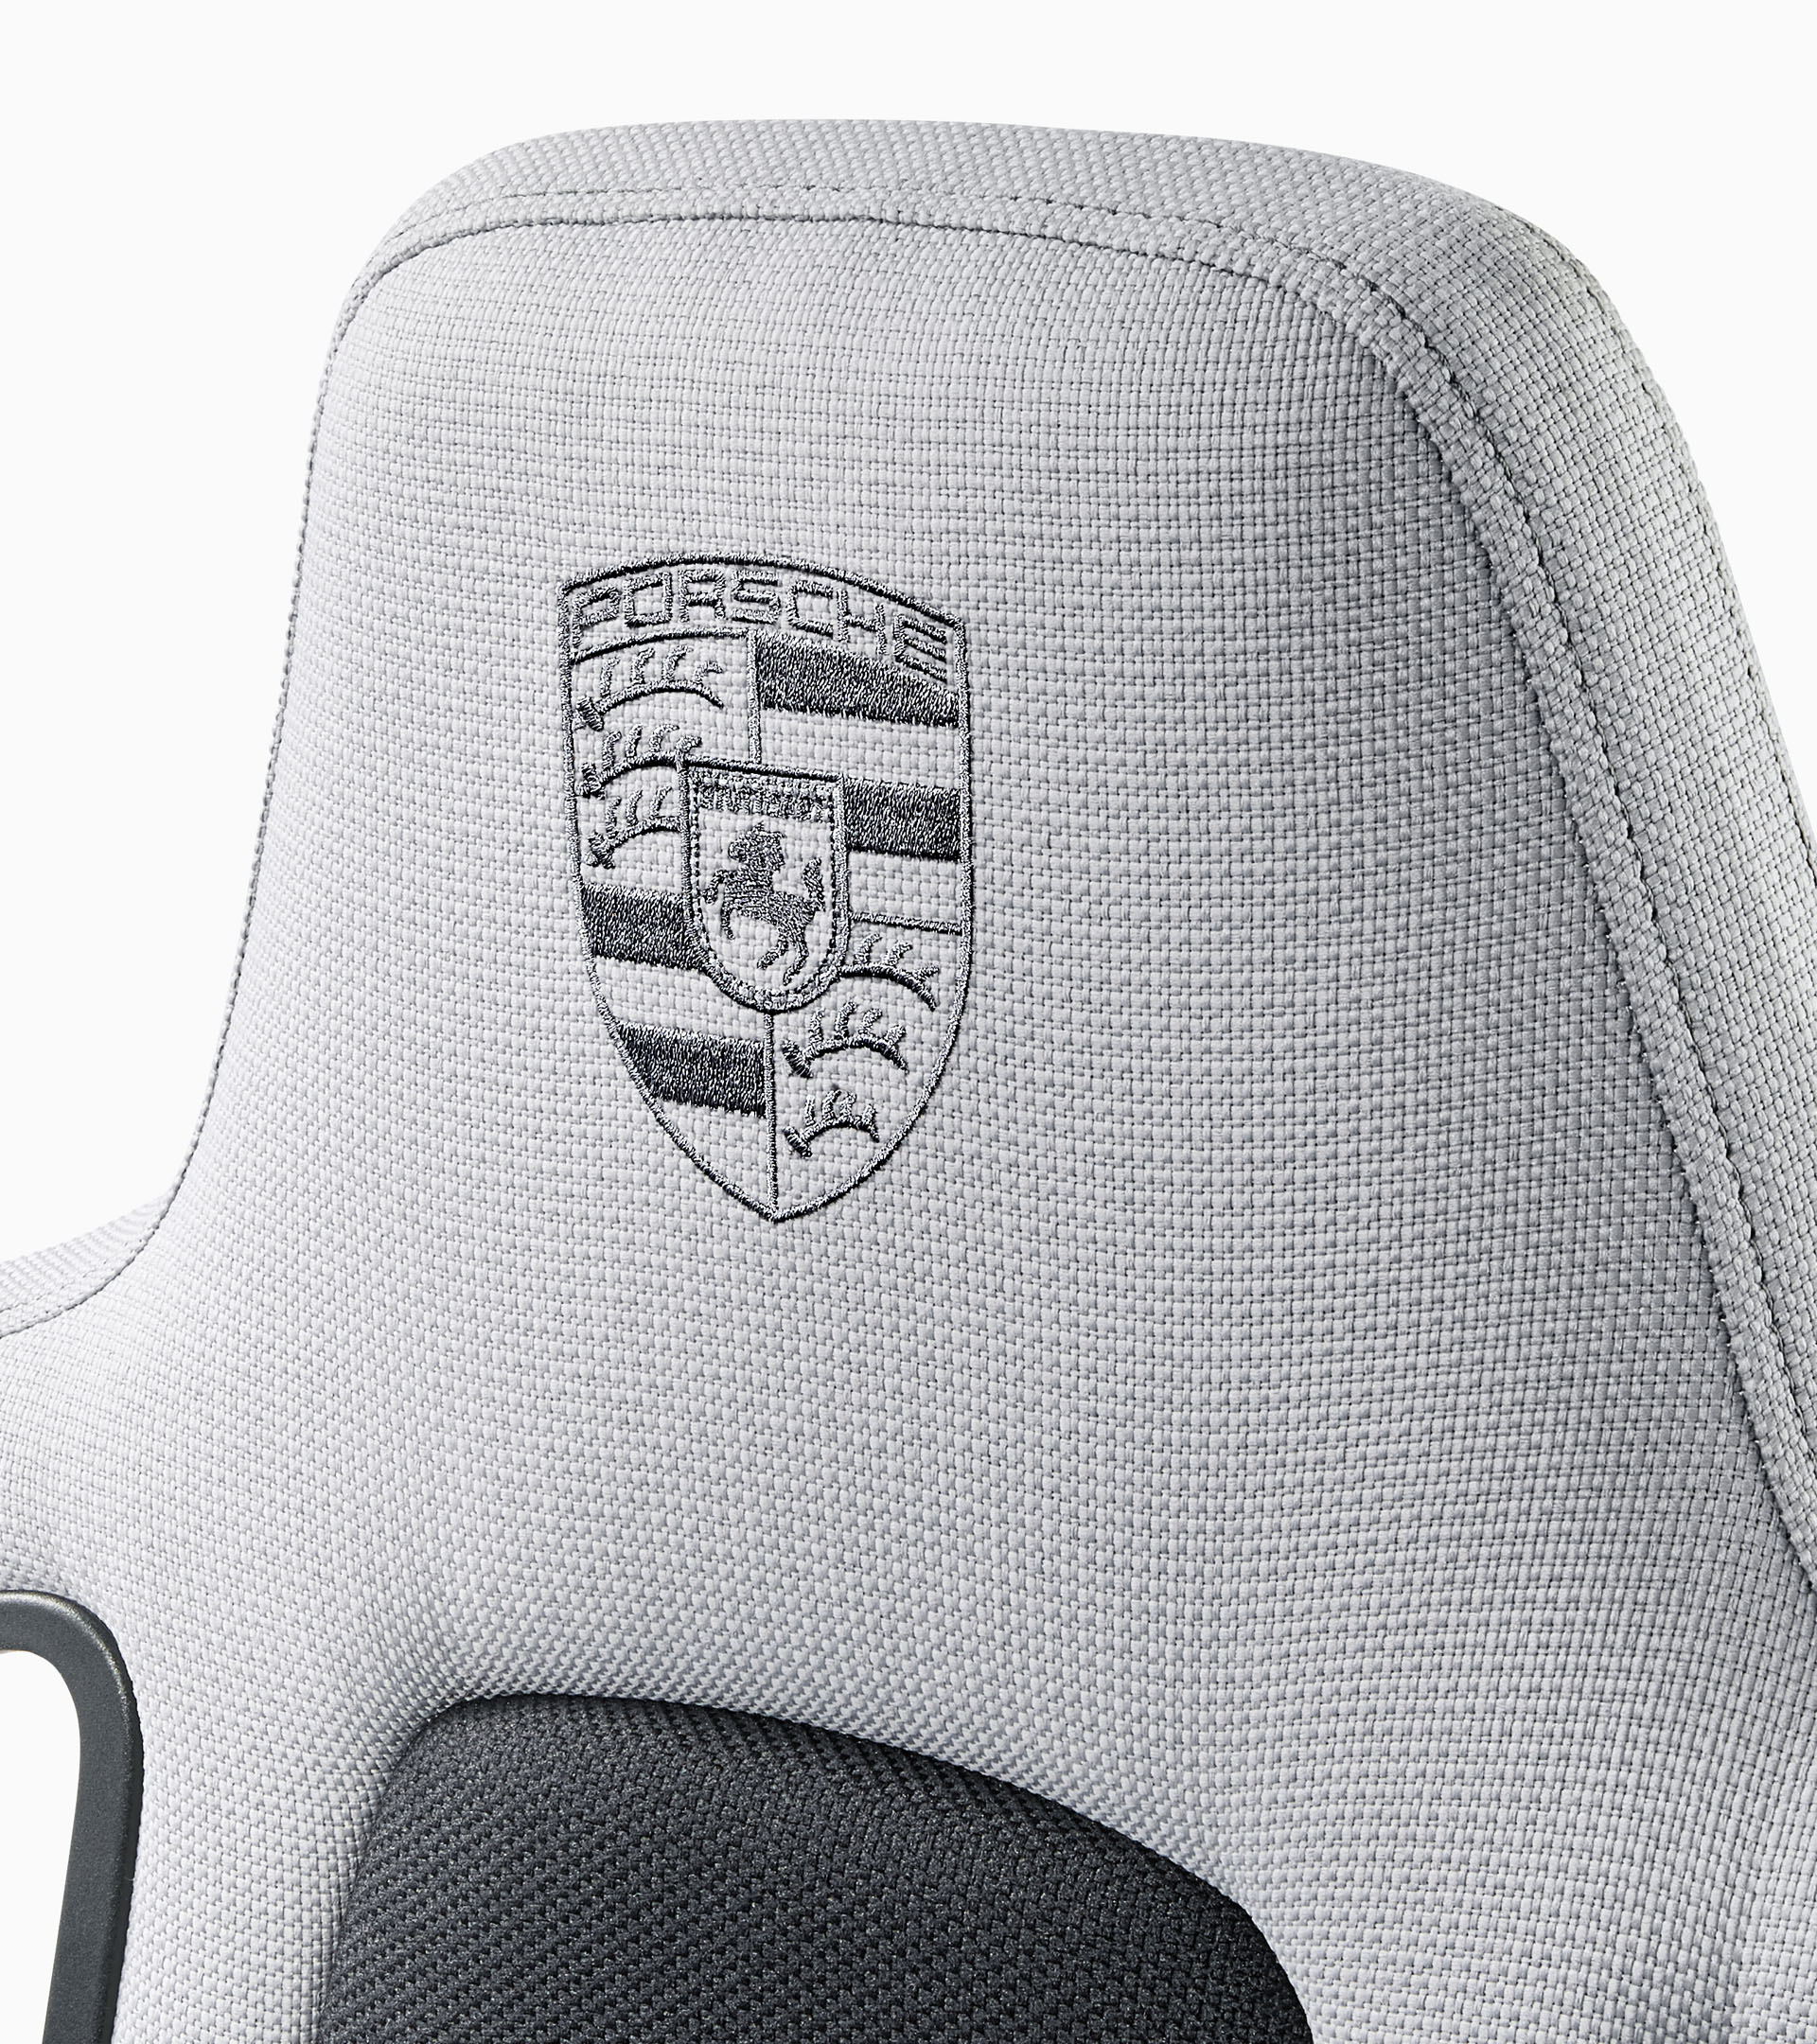 The RECARO x Porsche Gaming Chair is a limited edition gaming chair developed in cooperation between Recaro and Porsche.